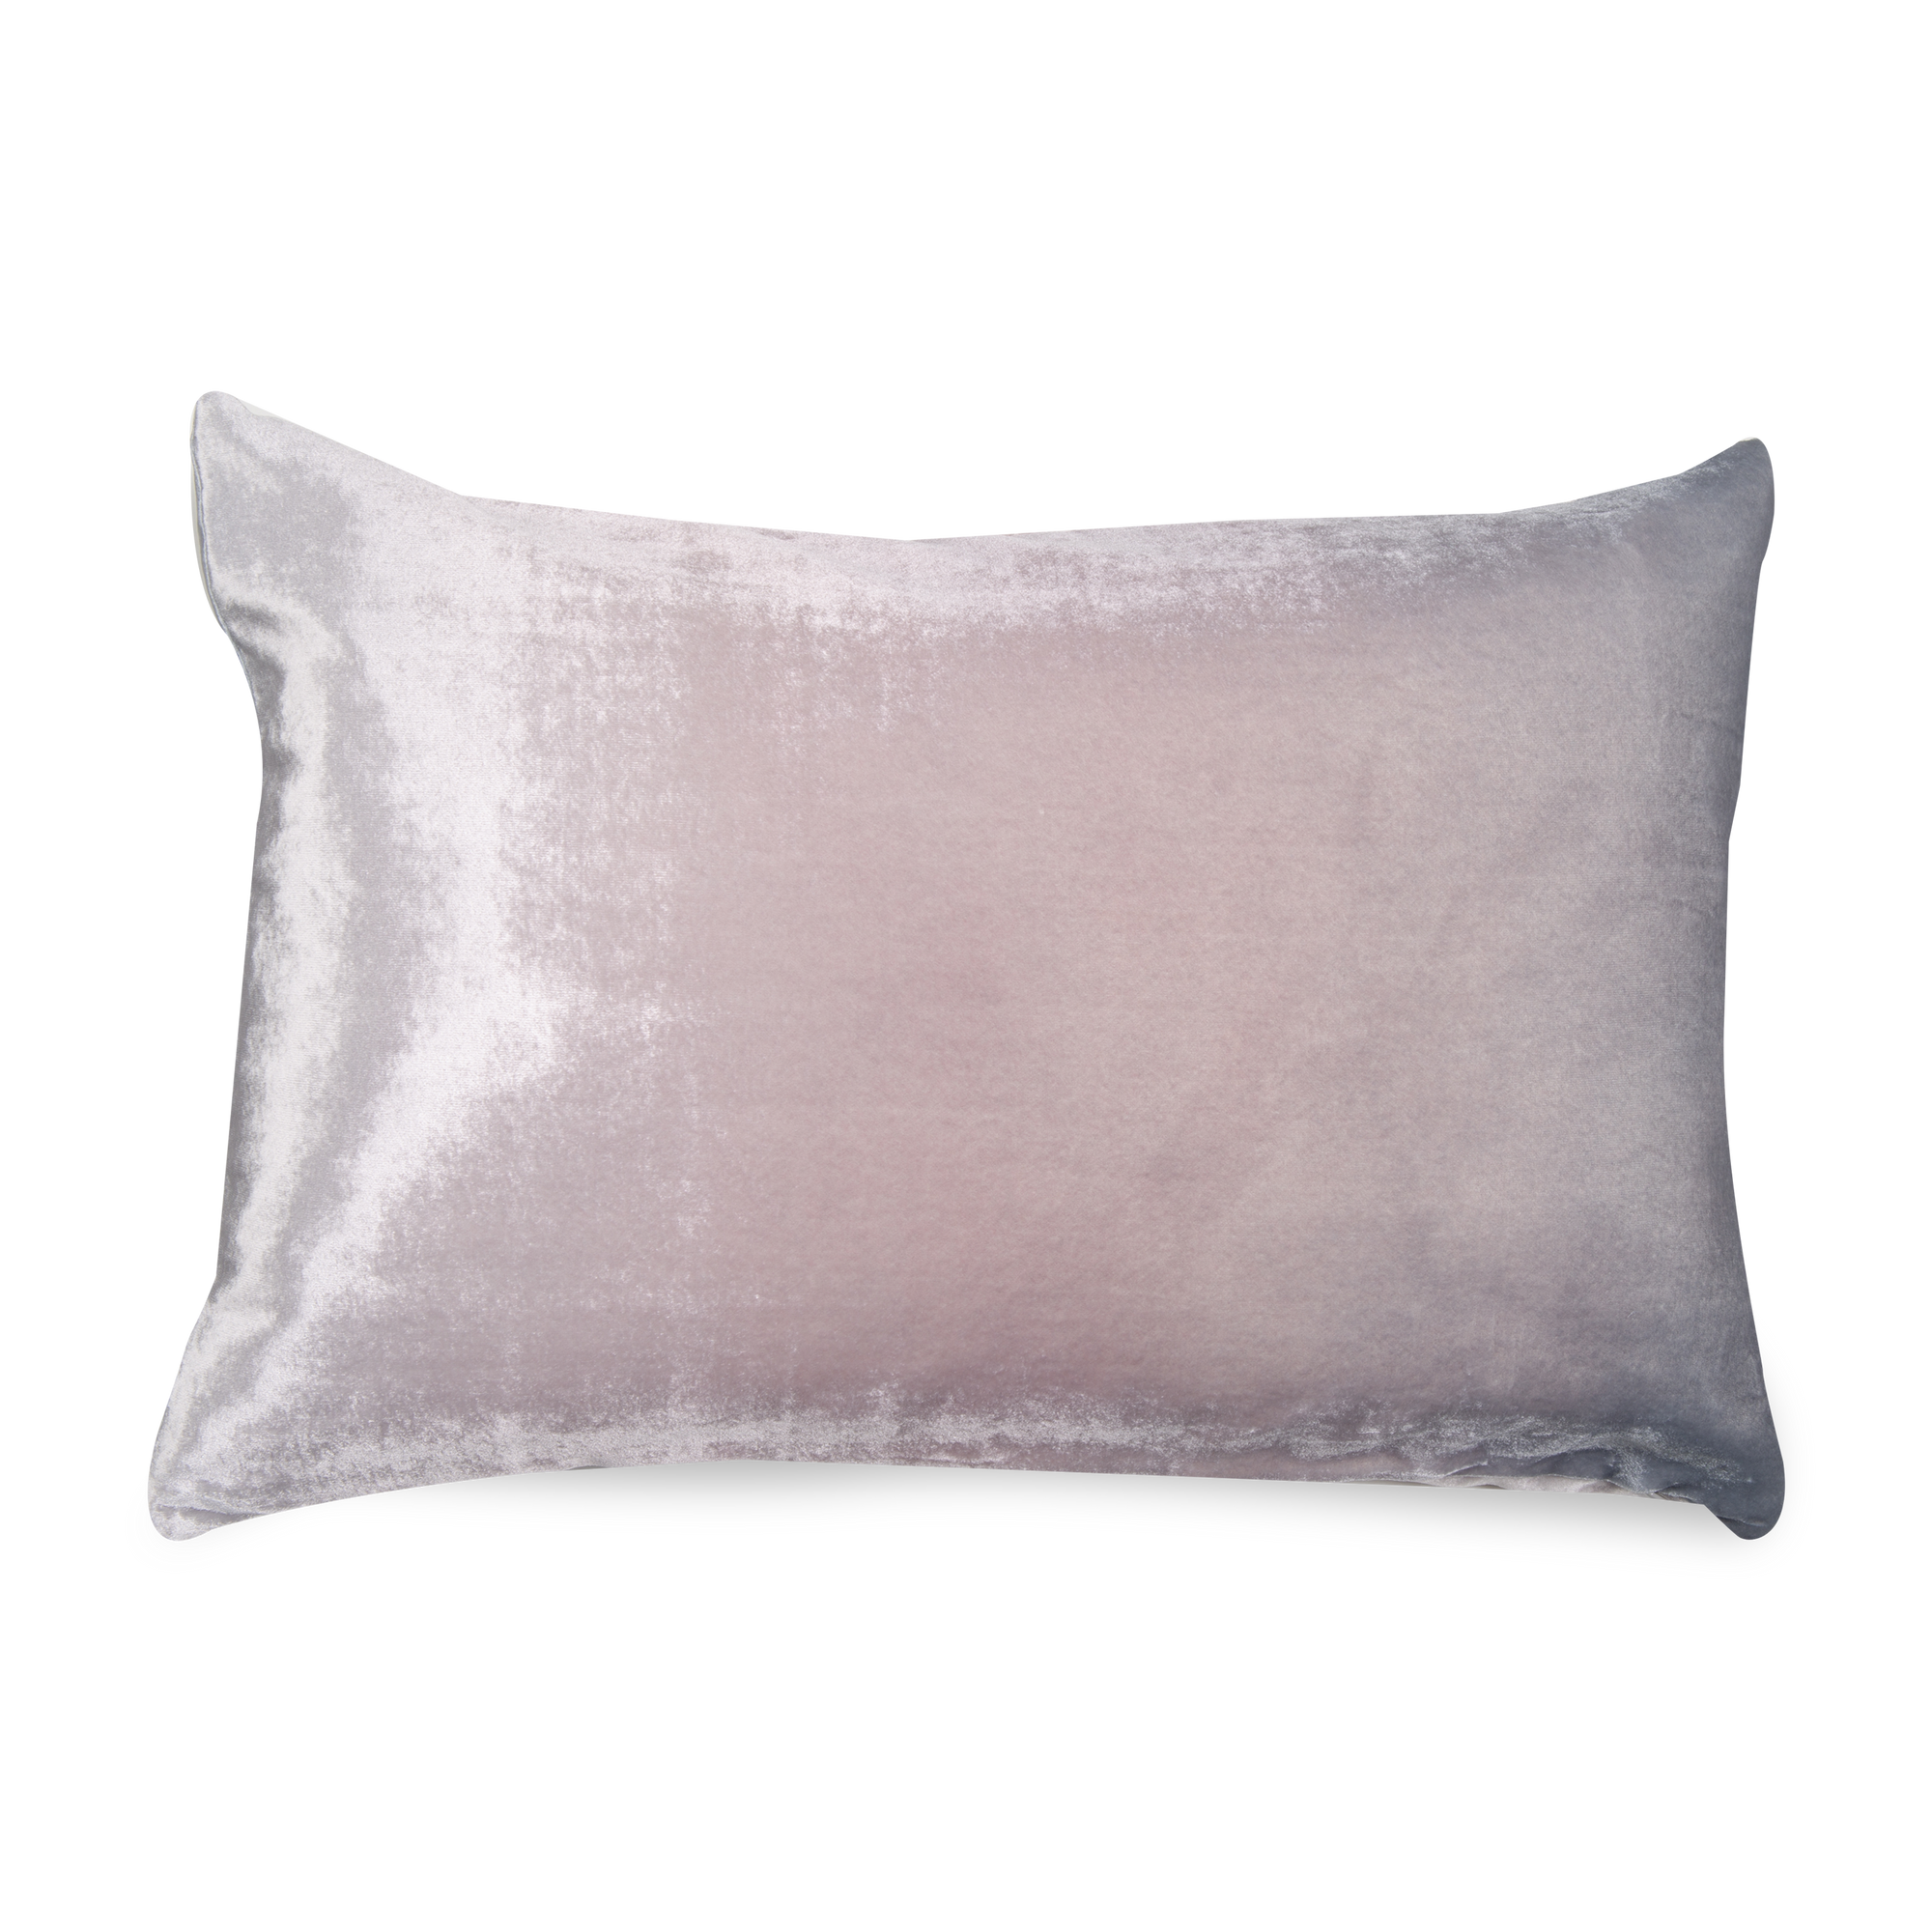 The hand-dyed Velvet Ombre Pillow is composed of striking hues.